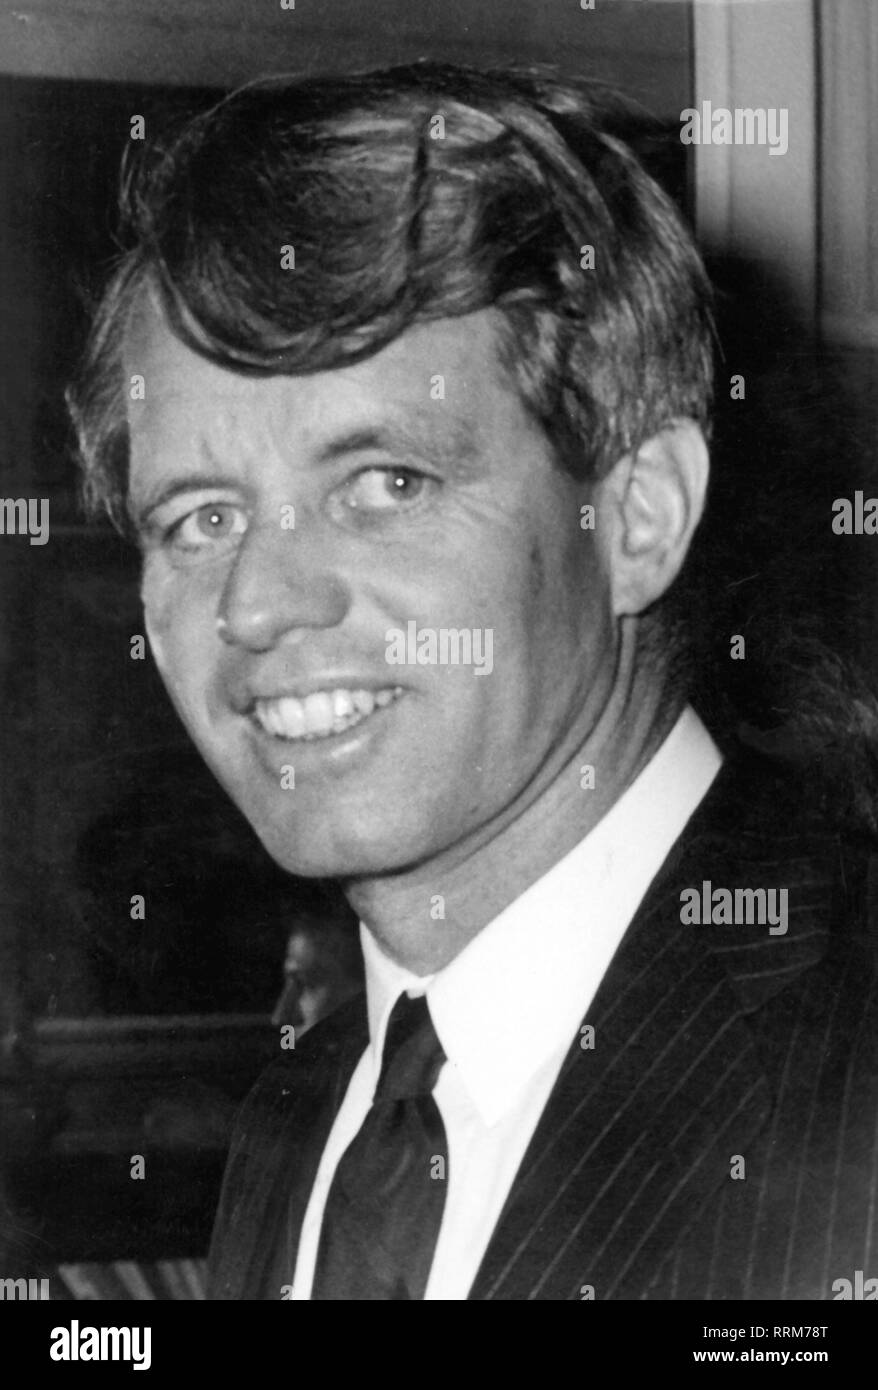 Kennedy, Robert Francis, 20.11.1925 - 6.6.1968, American politician (Democrats), United States senator from New York 3.1.1965 - 6.6.1968, portrait, 1960s, Additional-Rights-Clearance-Info-Not-Available Stock Photo